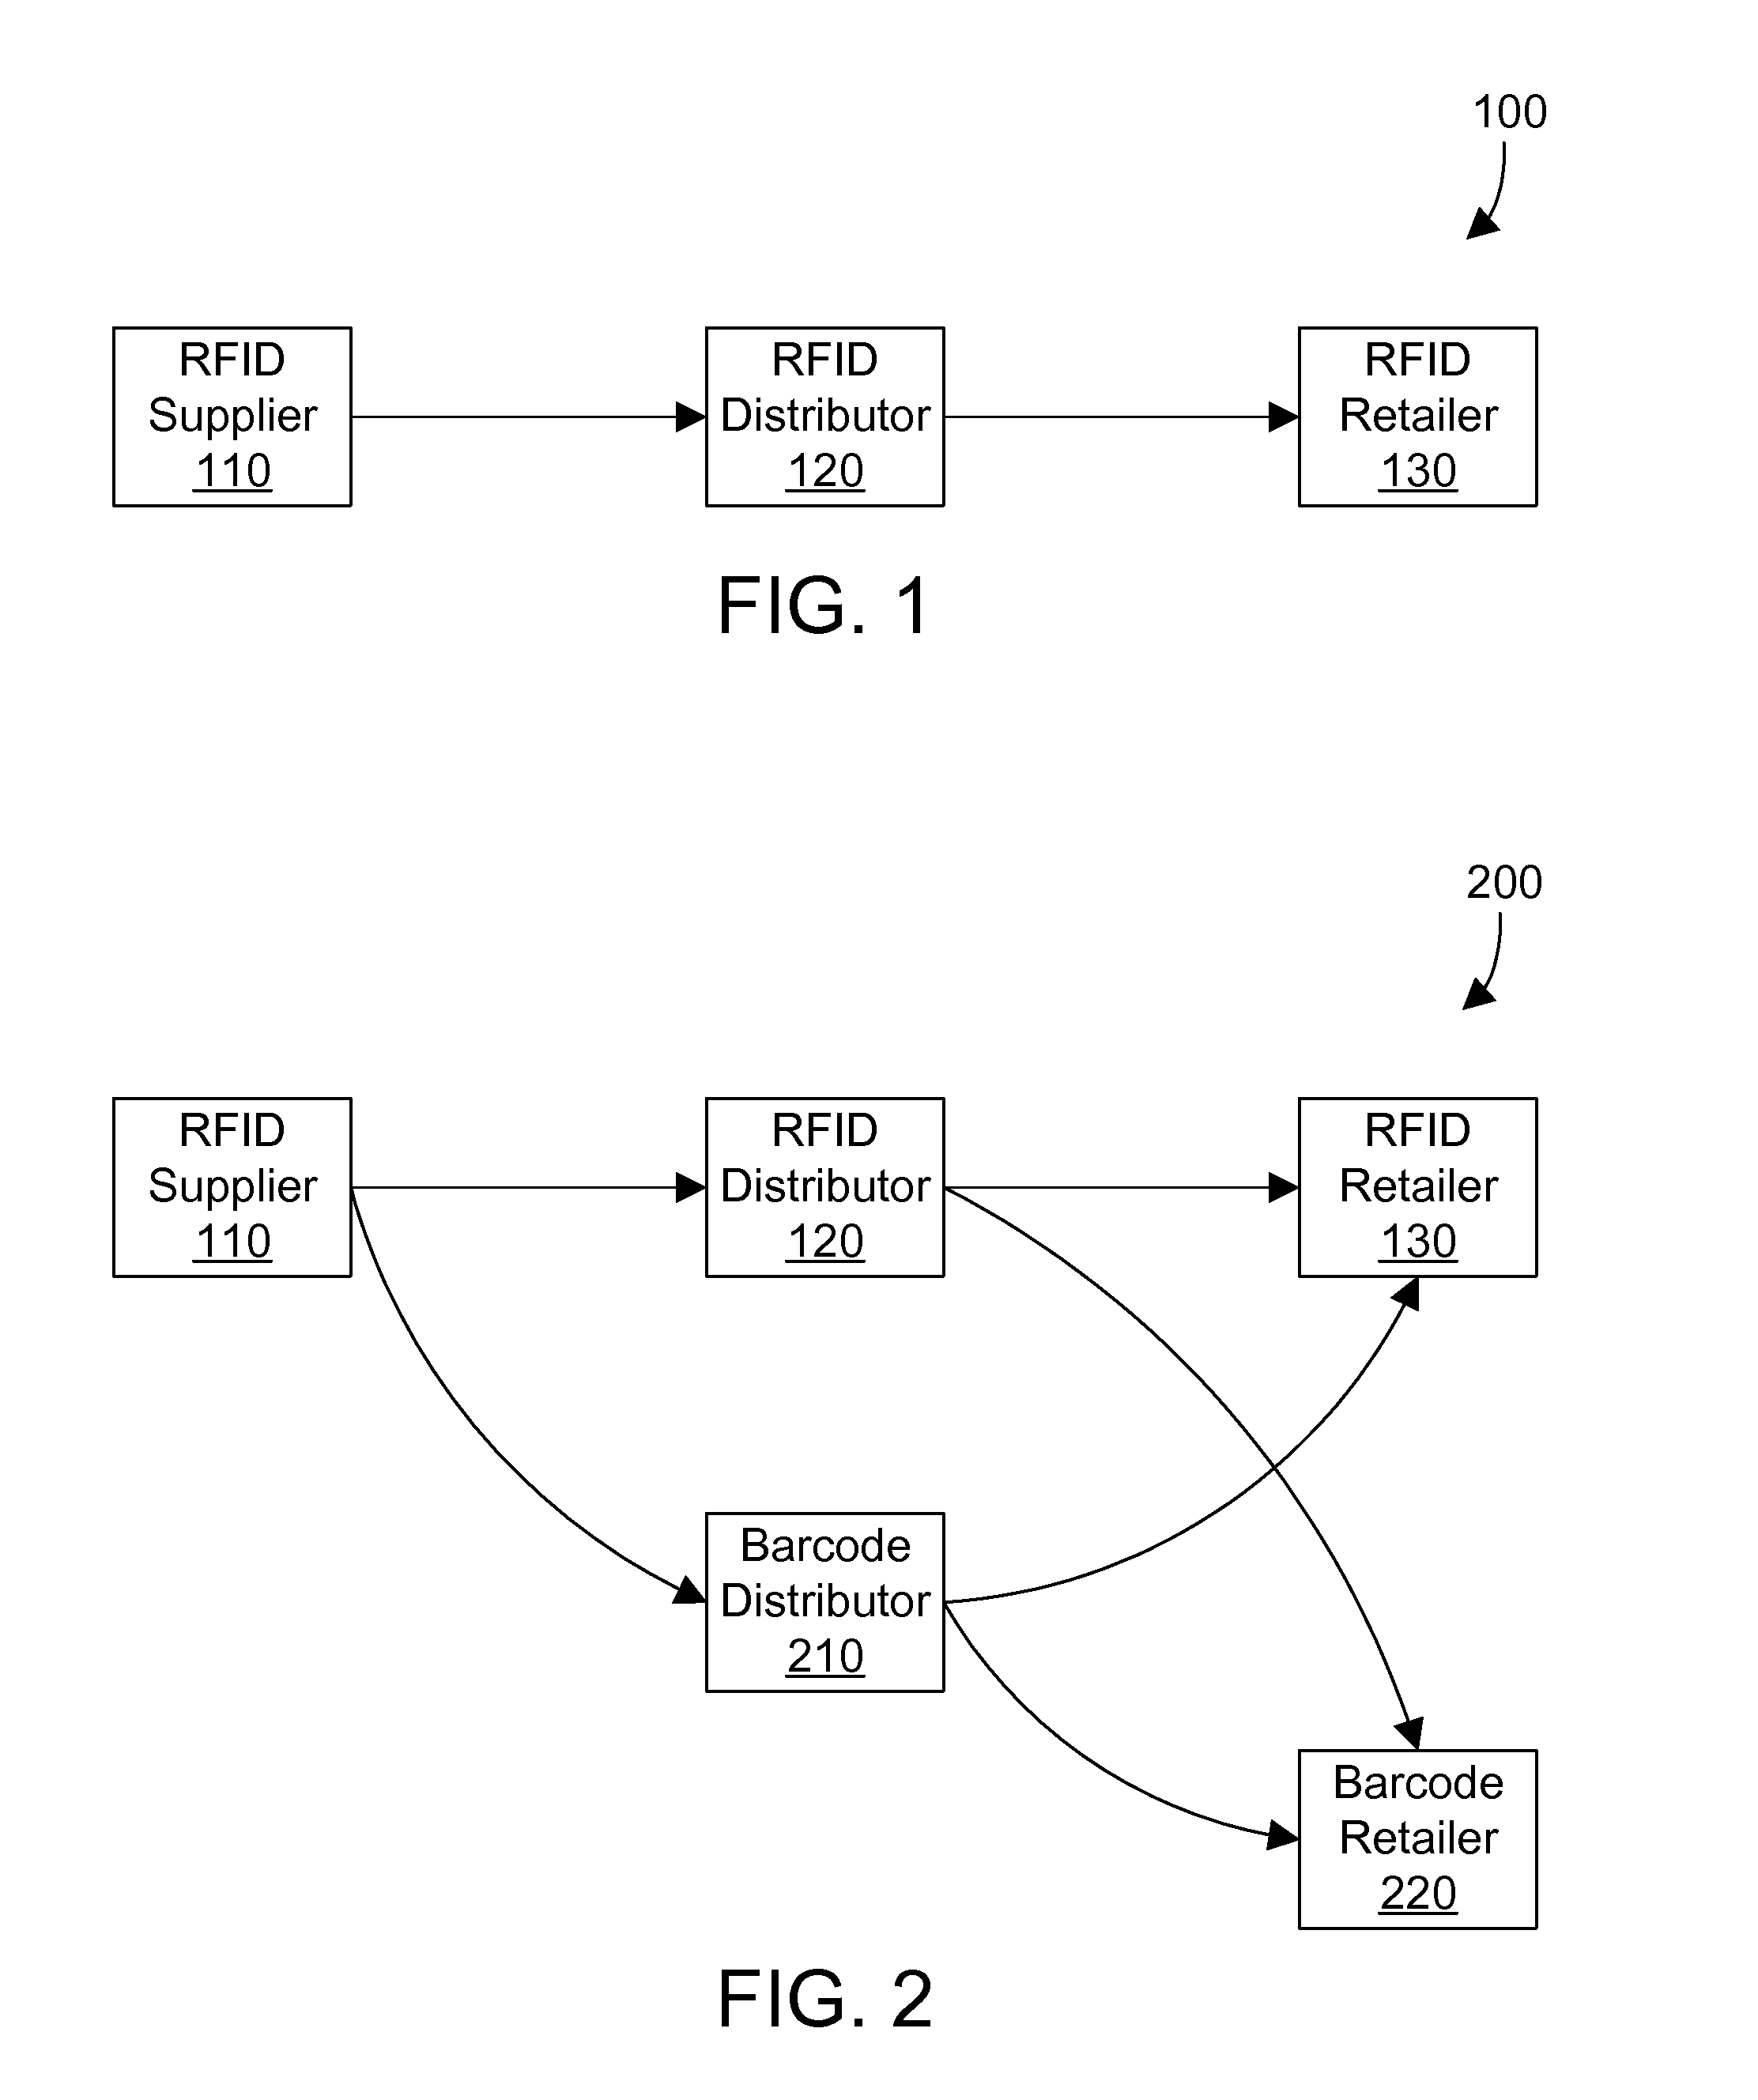 Pallet content identification mechanism that converts RFID information to corresponding barcode information